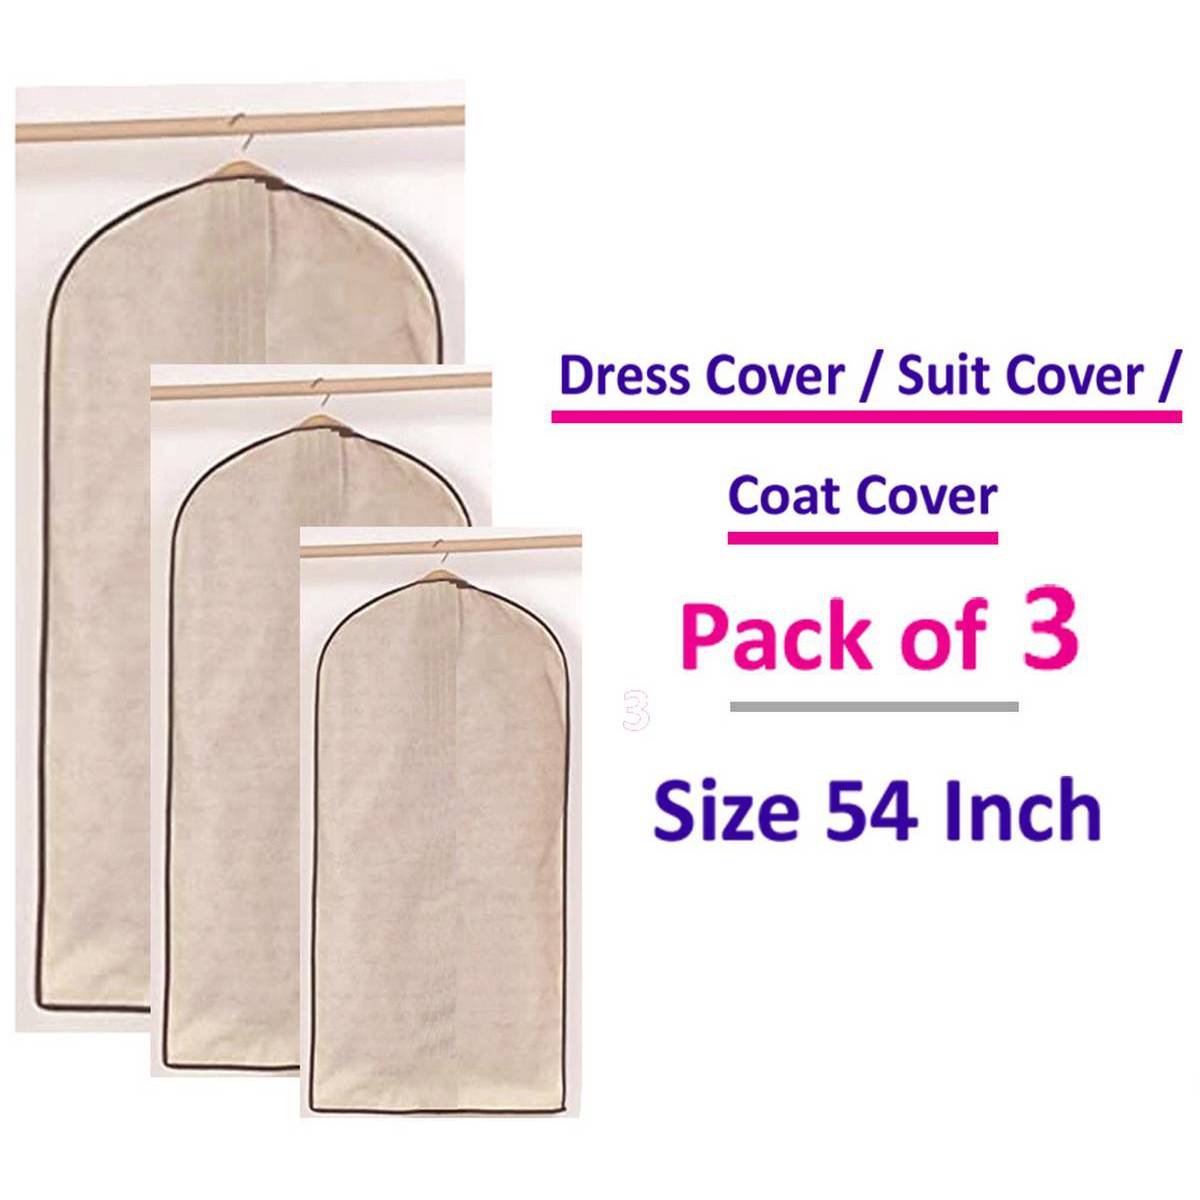 Pack Of 3 (54 Inch) Dress Covers / Coat Covers / Suit Cover / Cloth Cover / Suit Bags